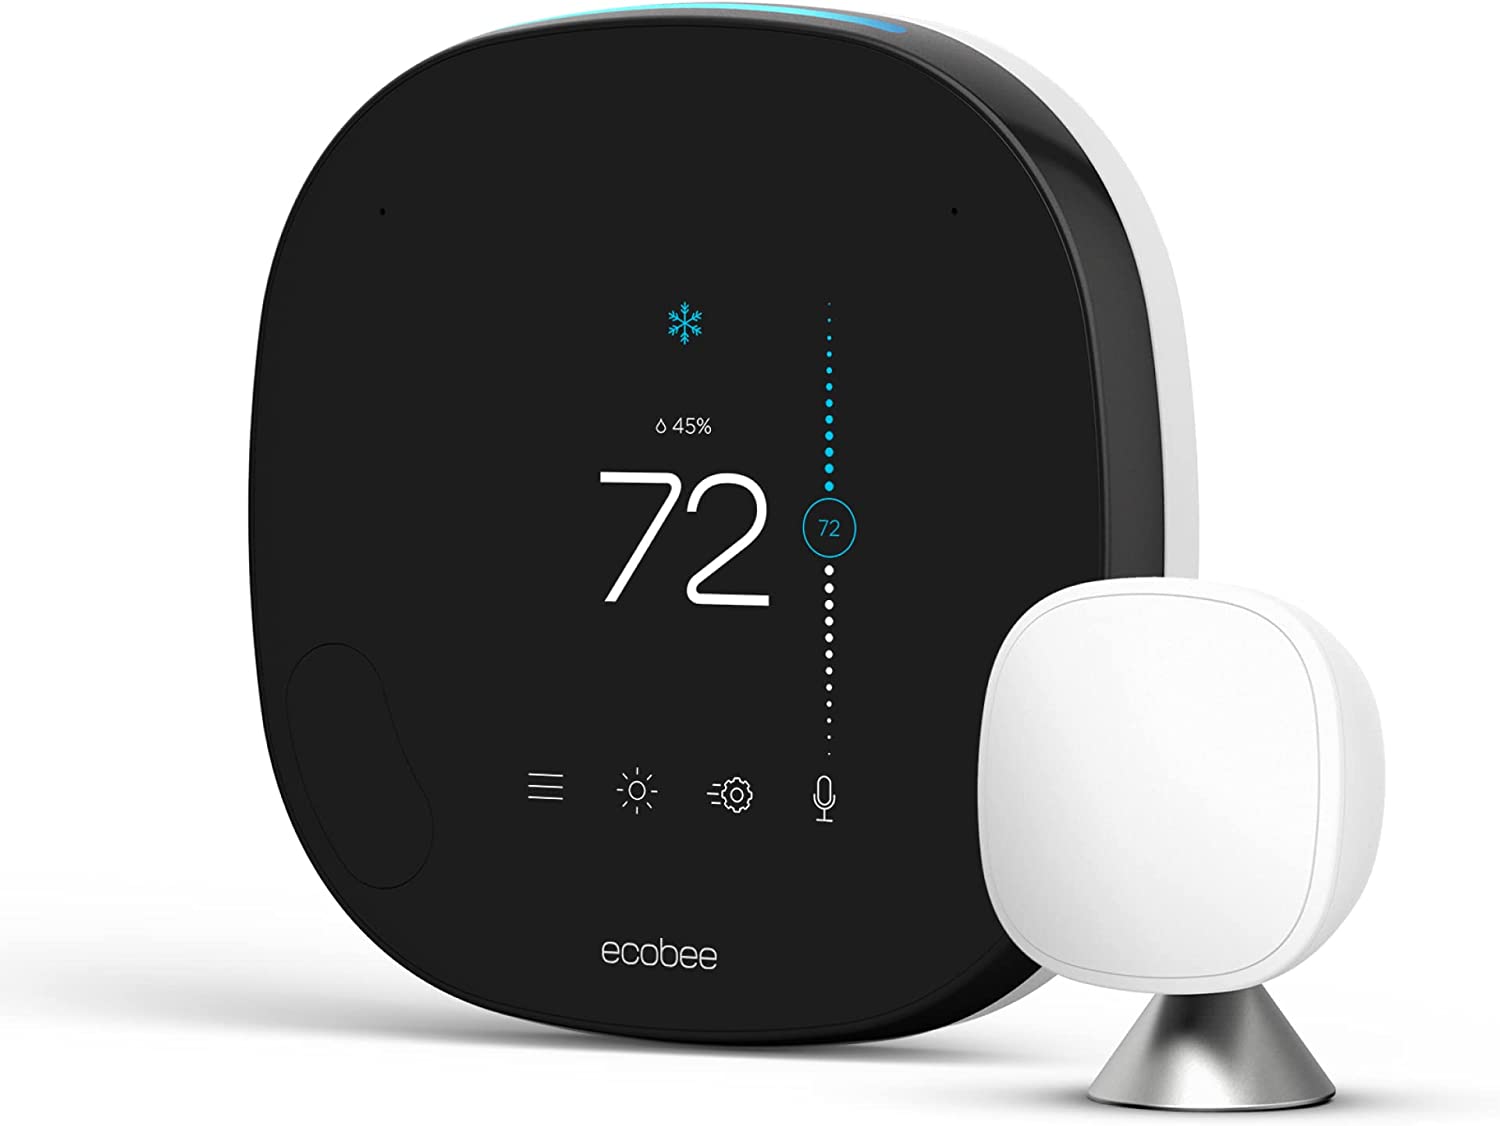 What Thermostats does Ring work with